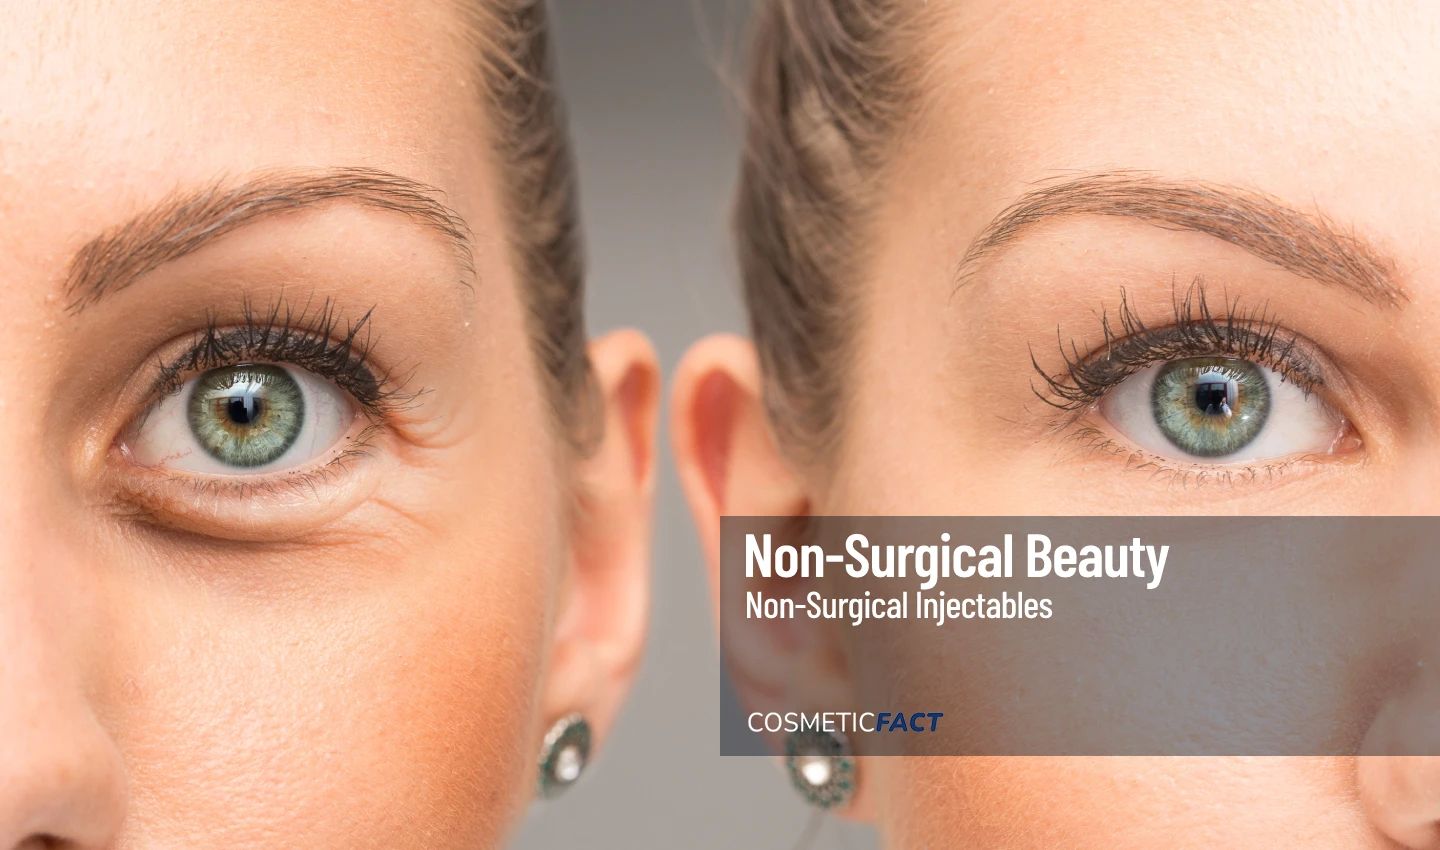 Before and after image of a woman's eye, demonstrating the effects of dermal fillers for under eye hollows treatment.